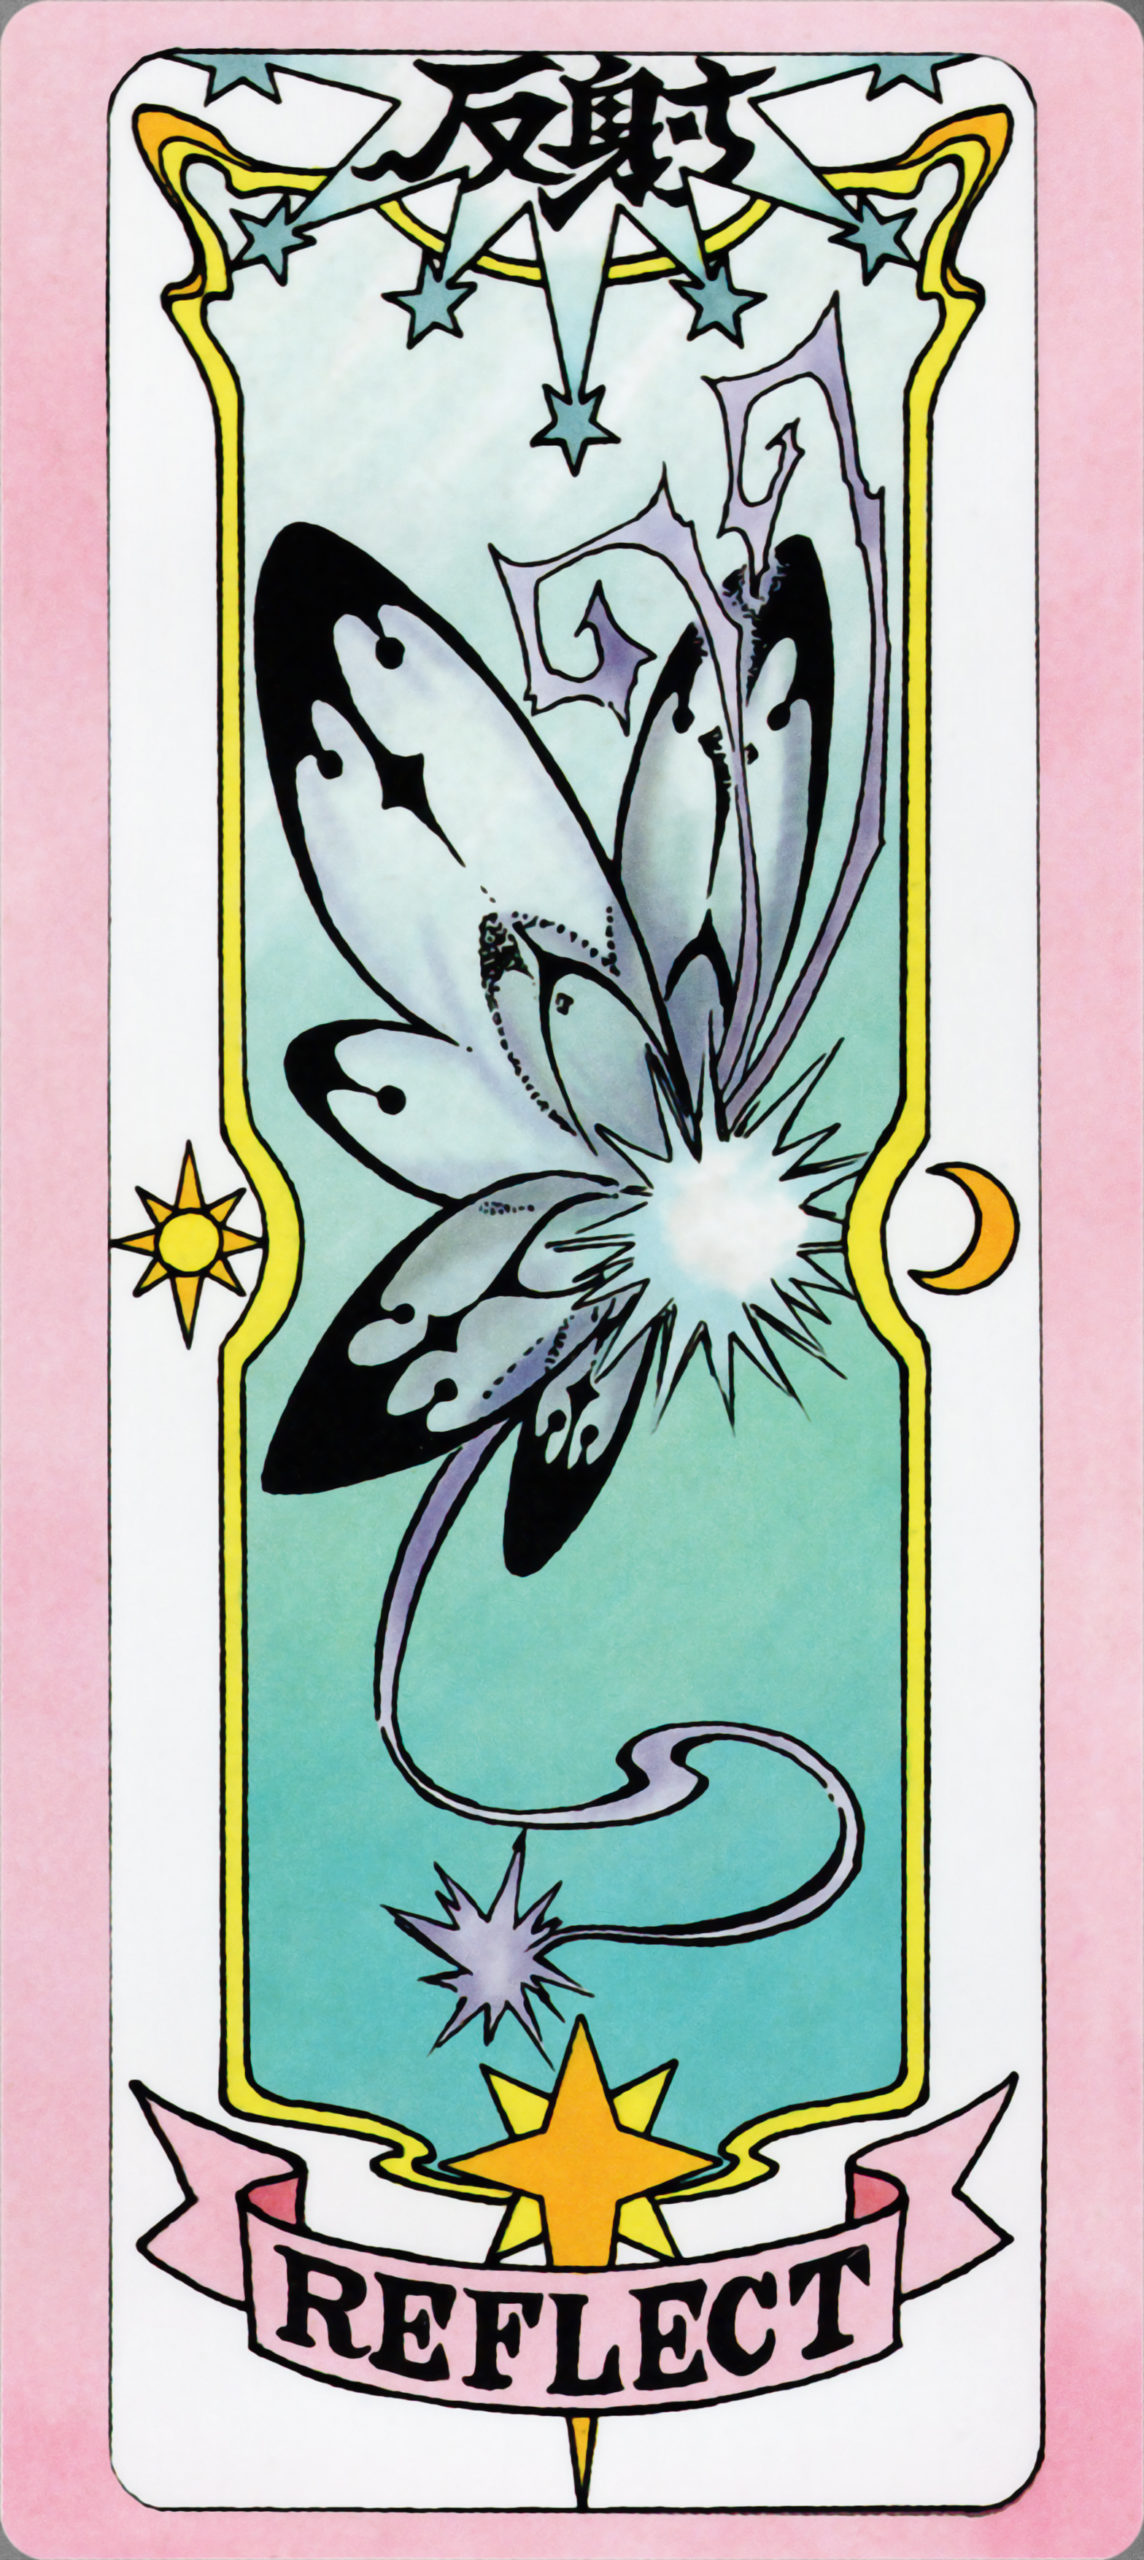 The Reflect Clear Card. (Image: CLAMP)